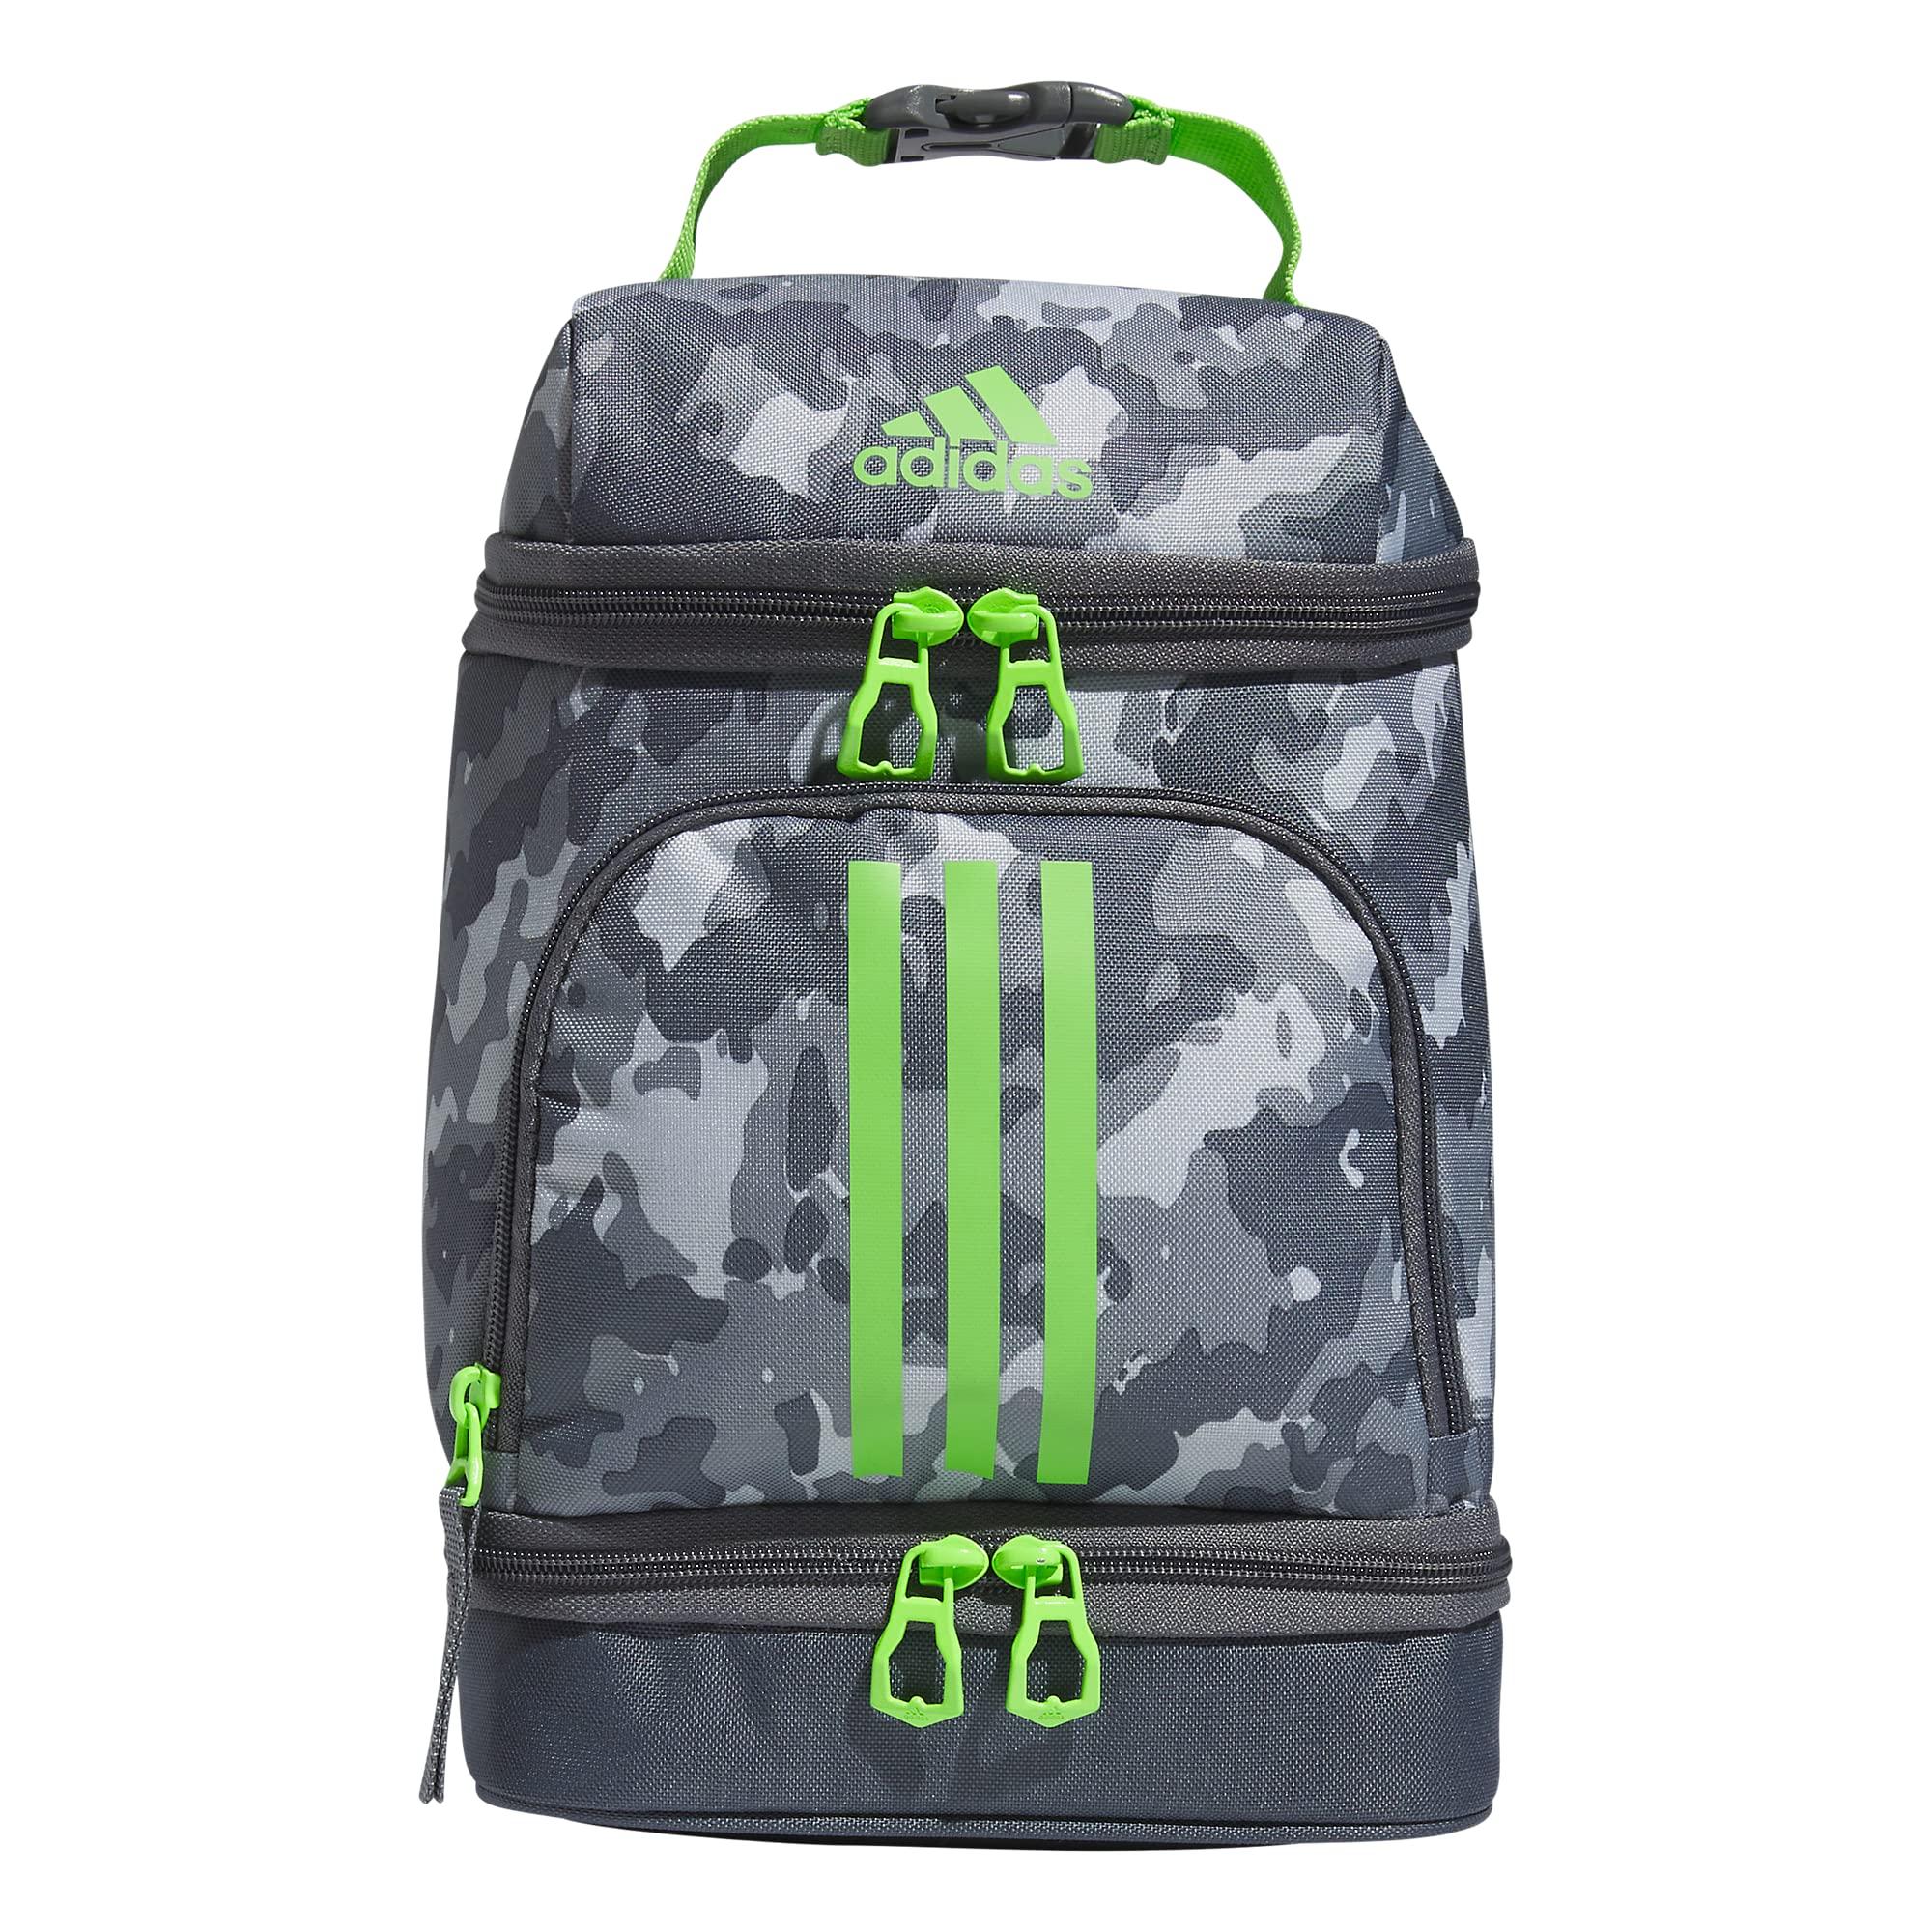 adidas Unisex Excel 2 Insulated Lunch Bag (Essential Camo Grey/Lucid Lime Green) $12.80 + Free Shipping w/ Prime or on orders over $35